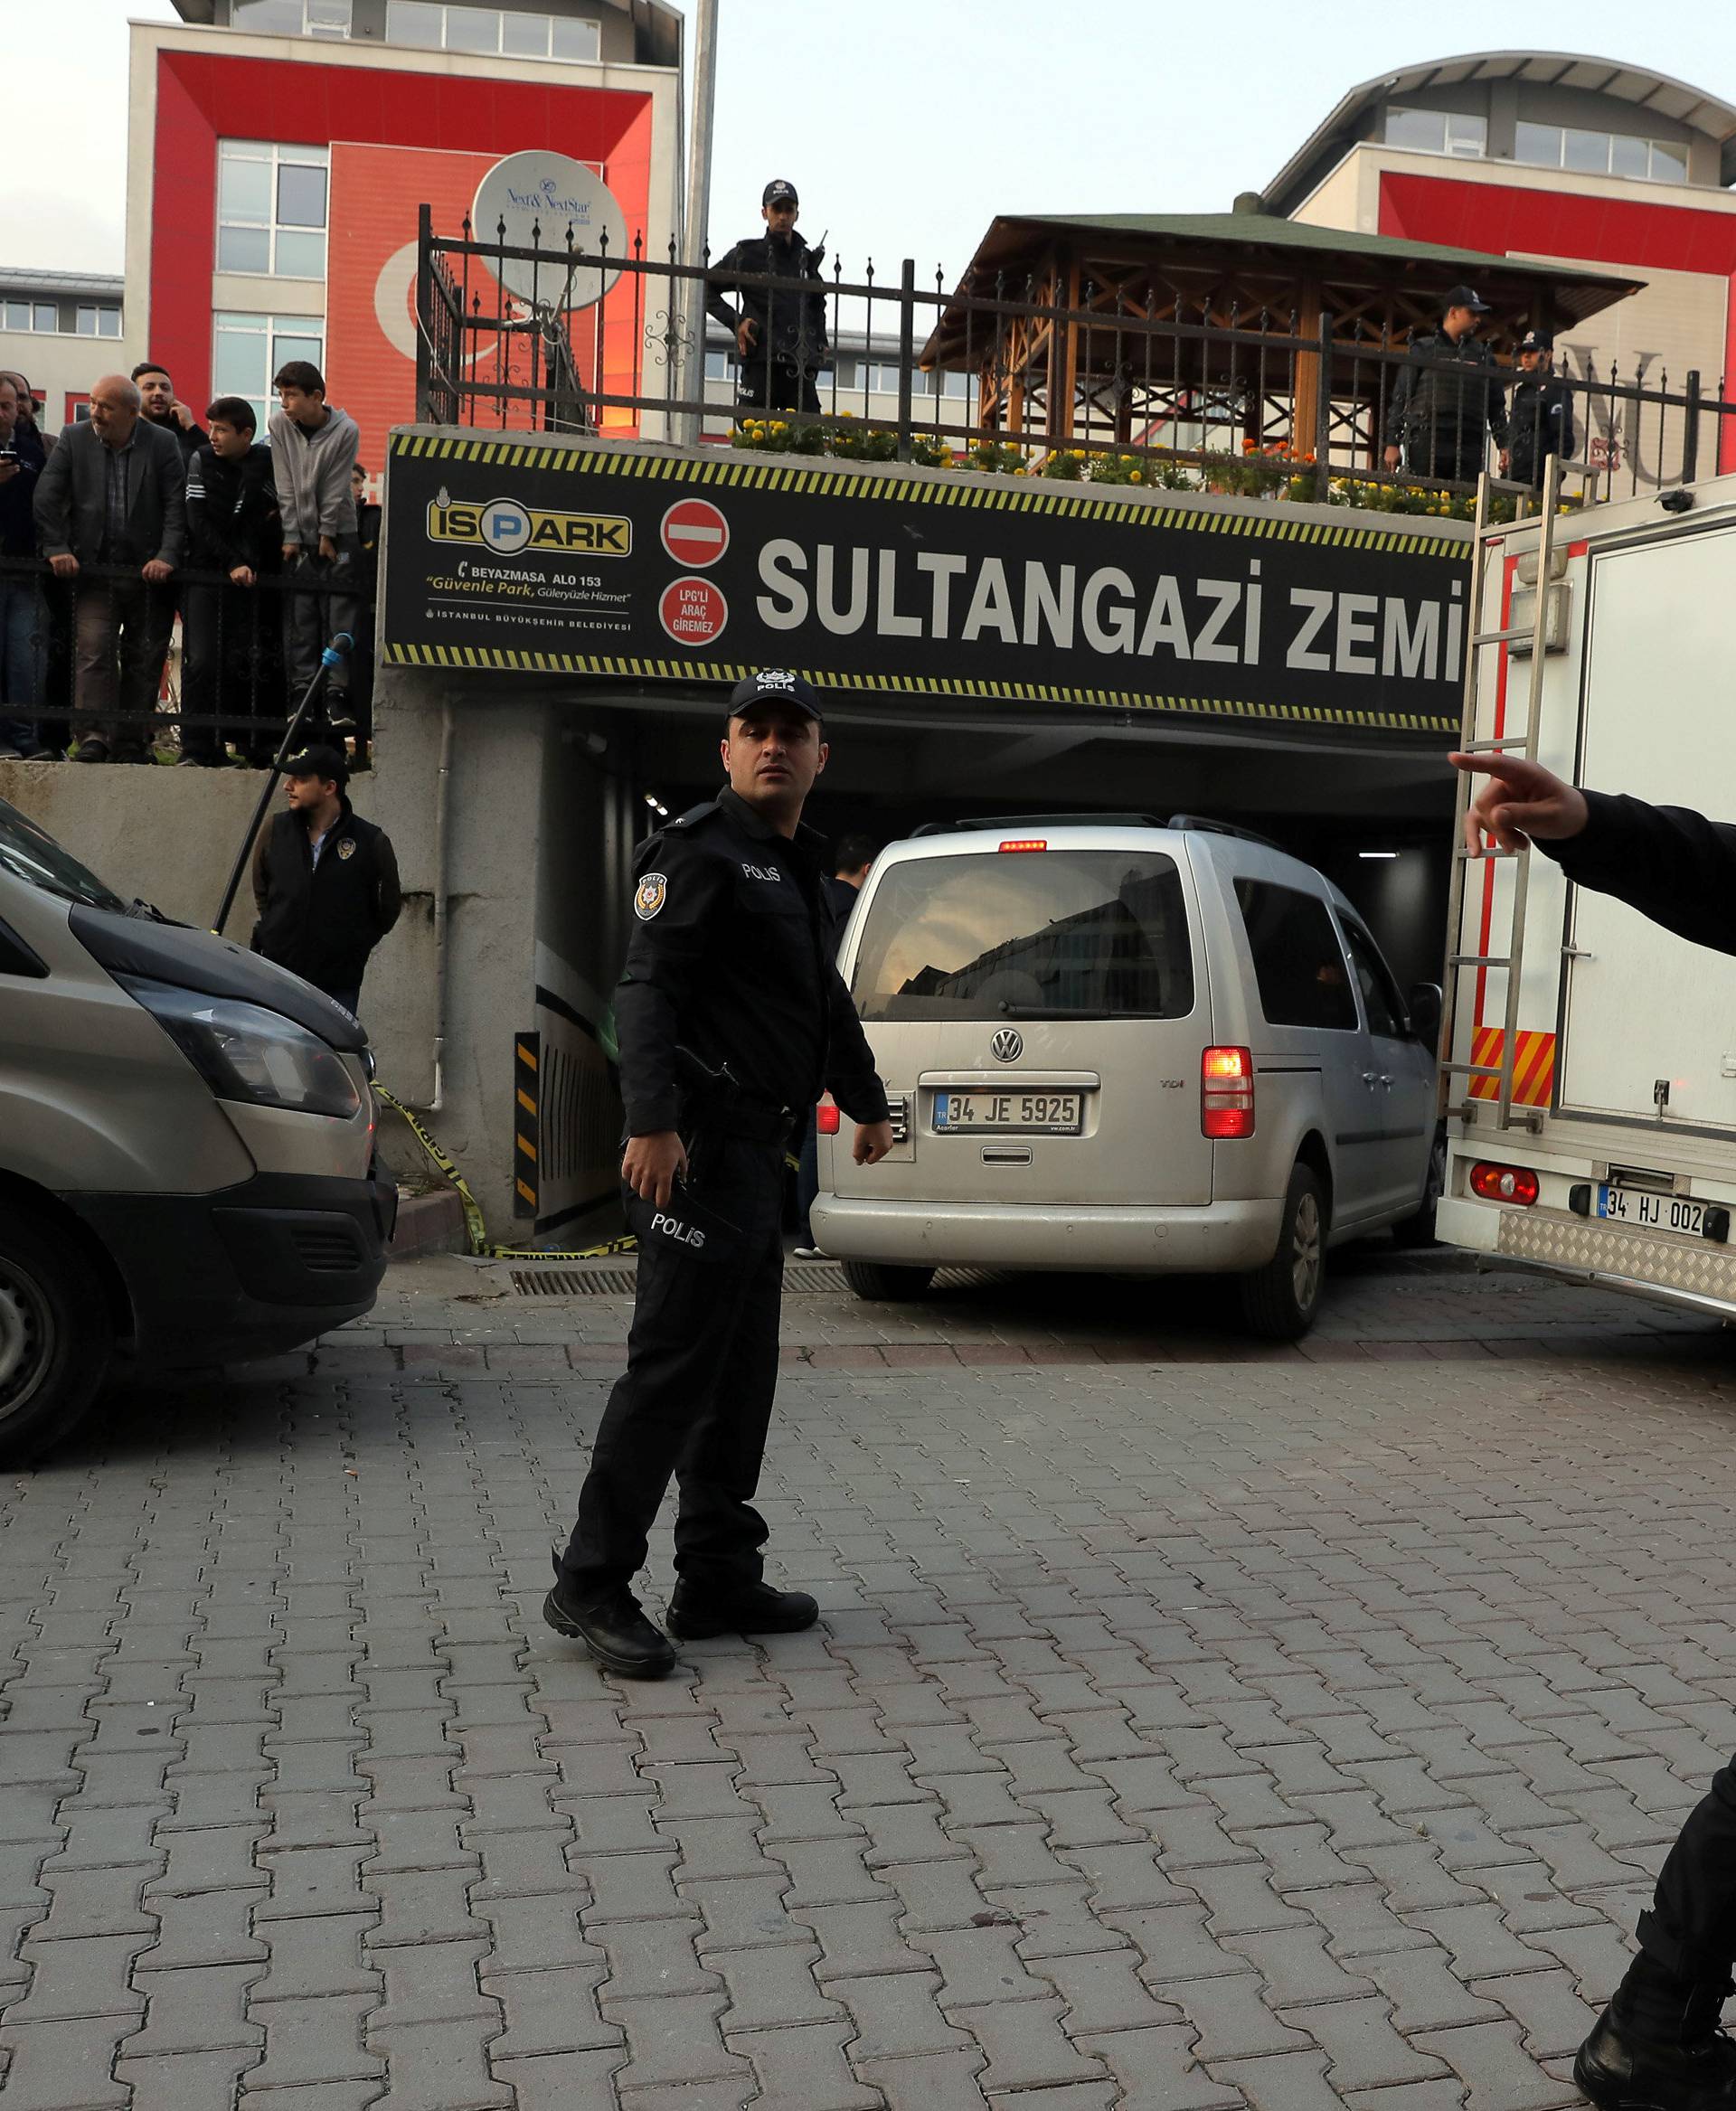 Turkish police and forensic experts arrive at a car park where a vehicle belonging to Saudi Arabia's consulate was found, in Istanbul